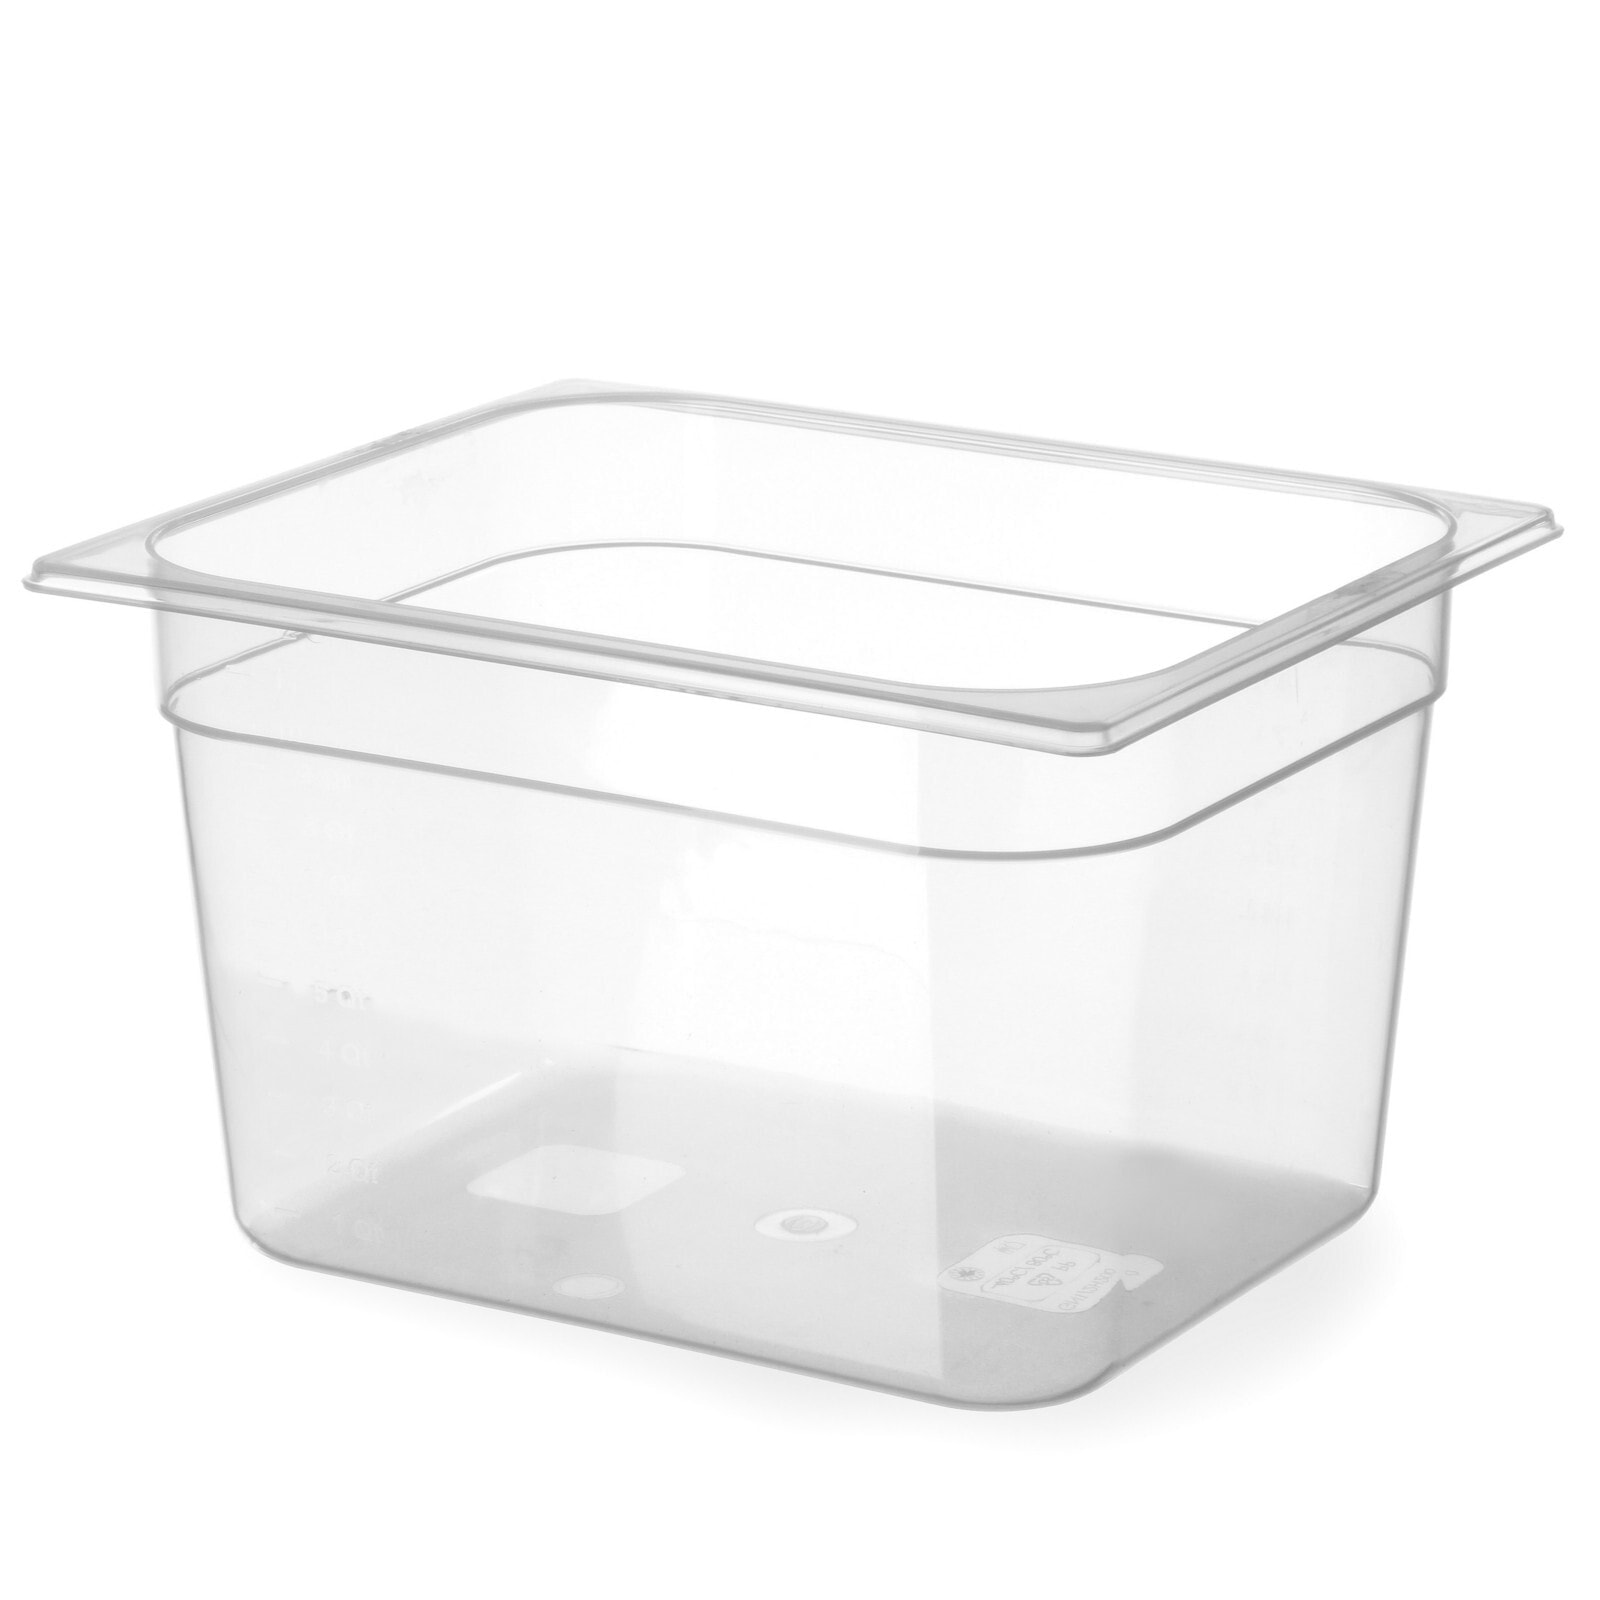 Gastronomy container made of polypropylene GN 1/2, height 200 mm - Hendi 880104